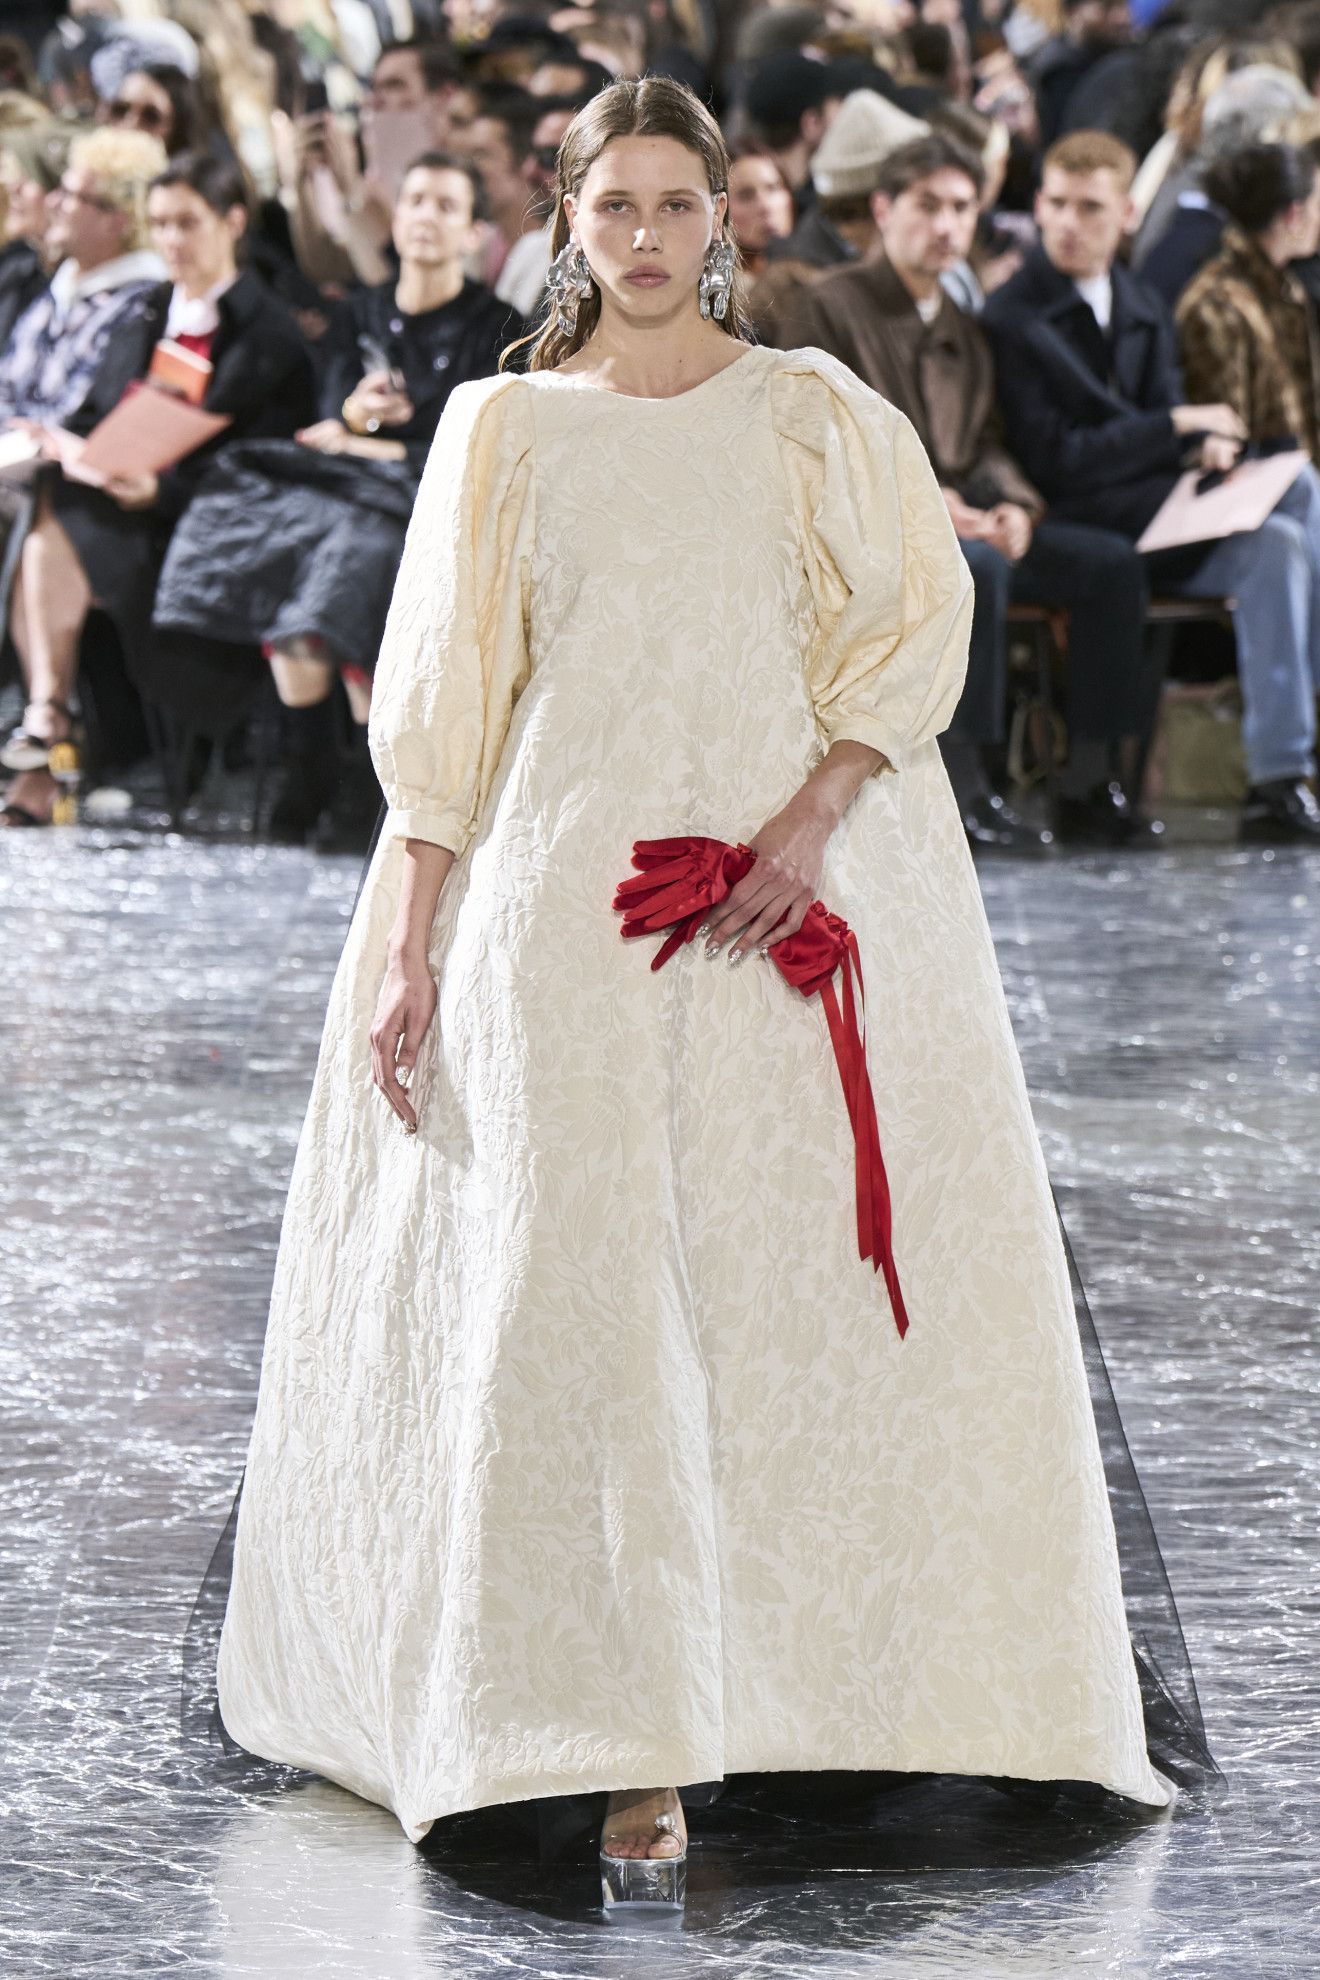 Photos: Gorgeous gowns at New York Fashion Week